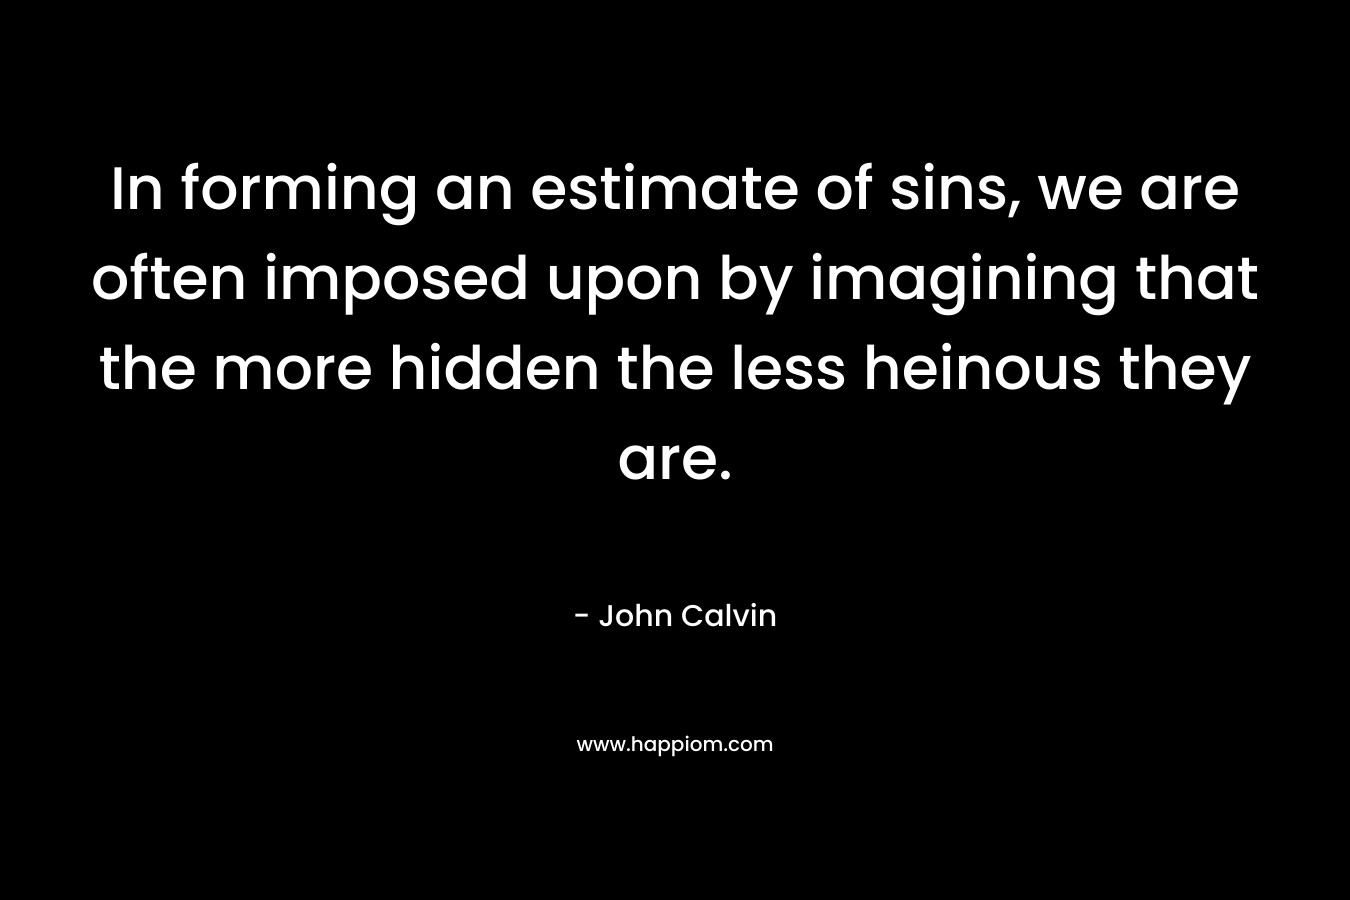 In forming an estimate of sins, we are often imposed upon by imagining that the more hidden the less heinous they are.